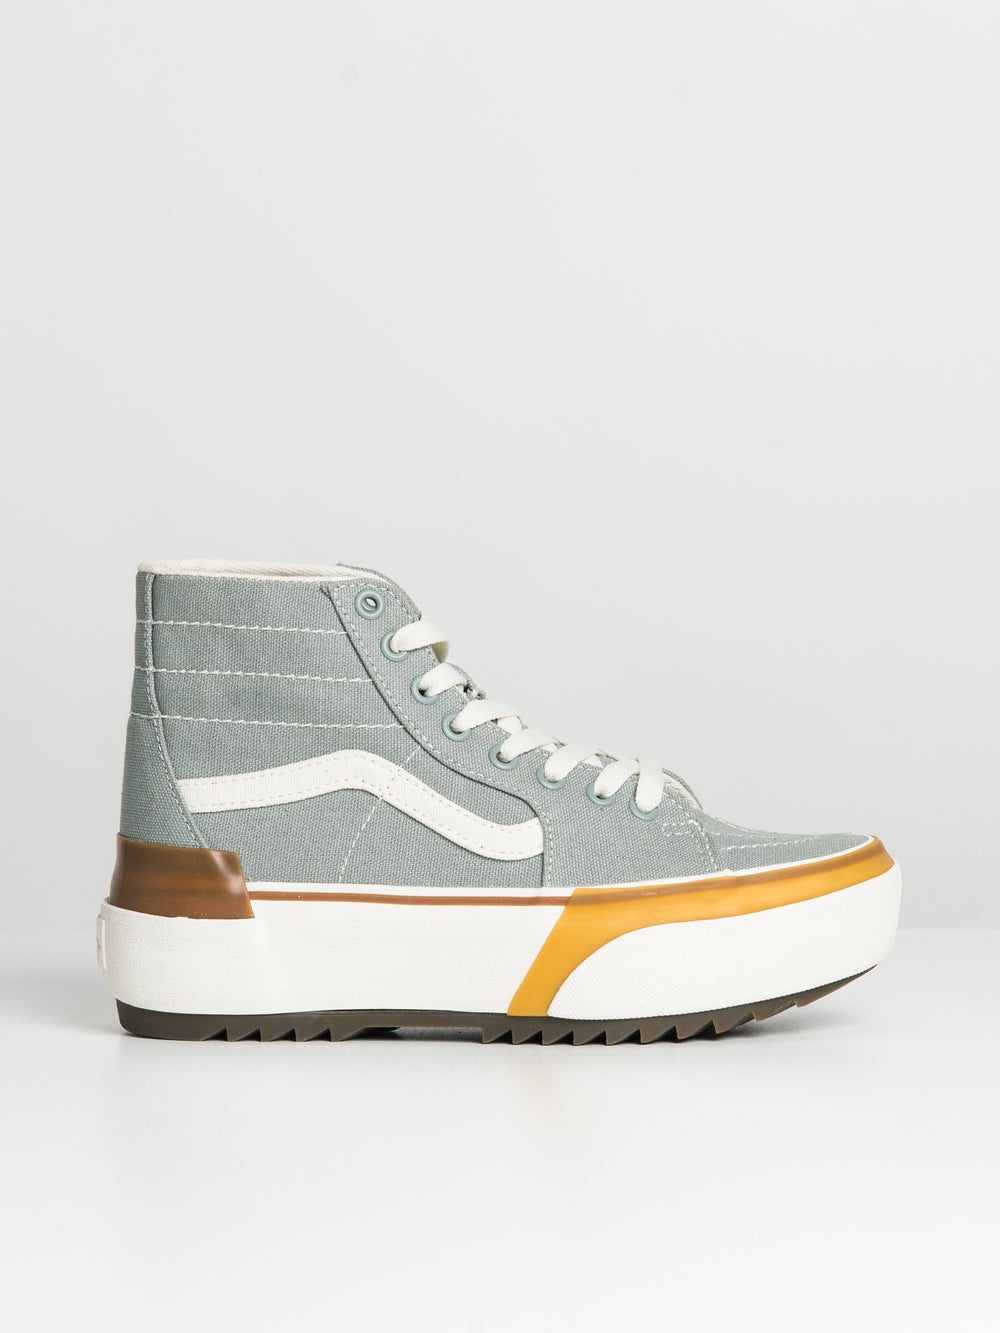 WOMENS VANS SK8 HI TAPERED STACKED CANVAS - CLEARANCE